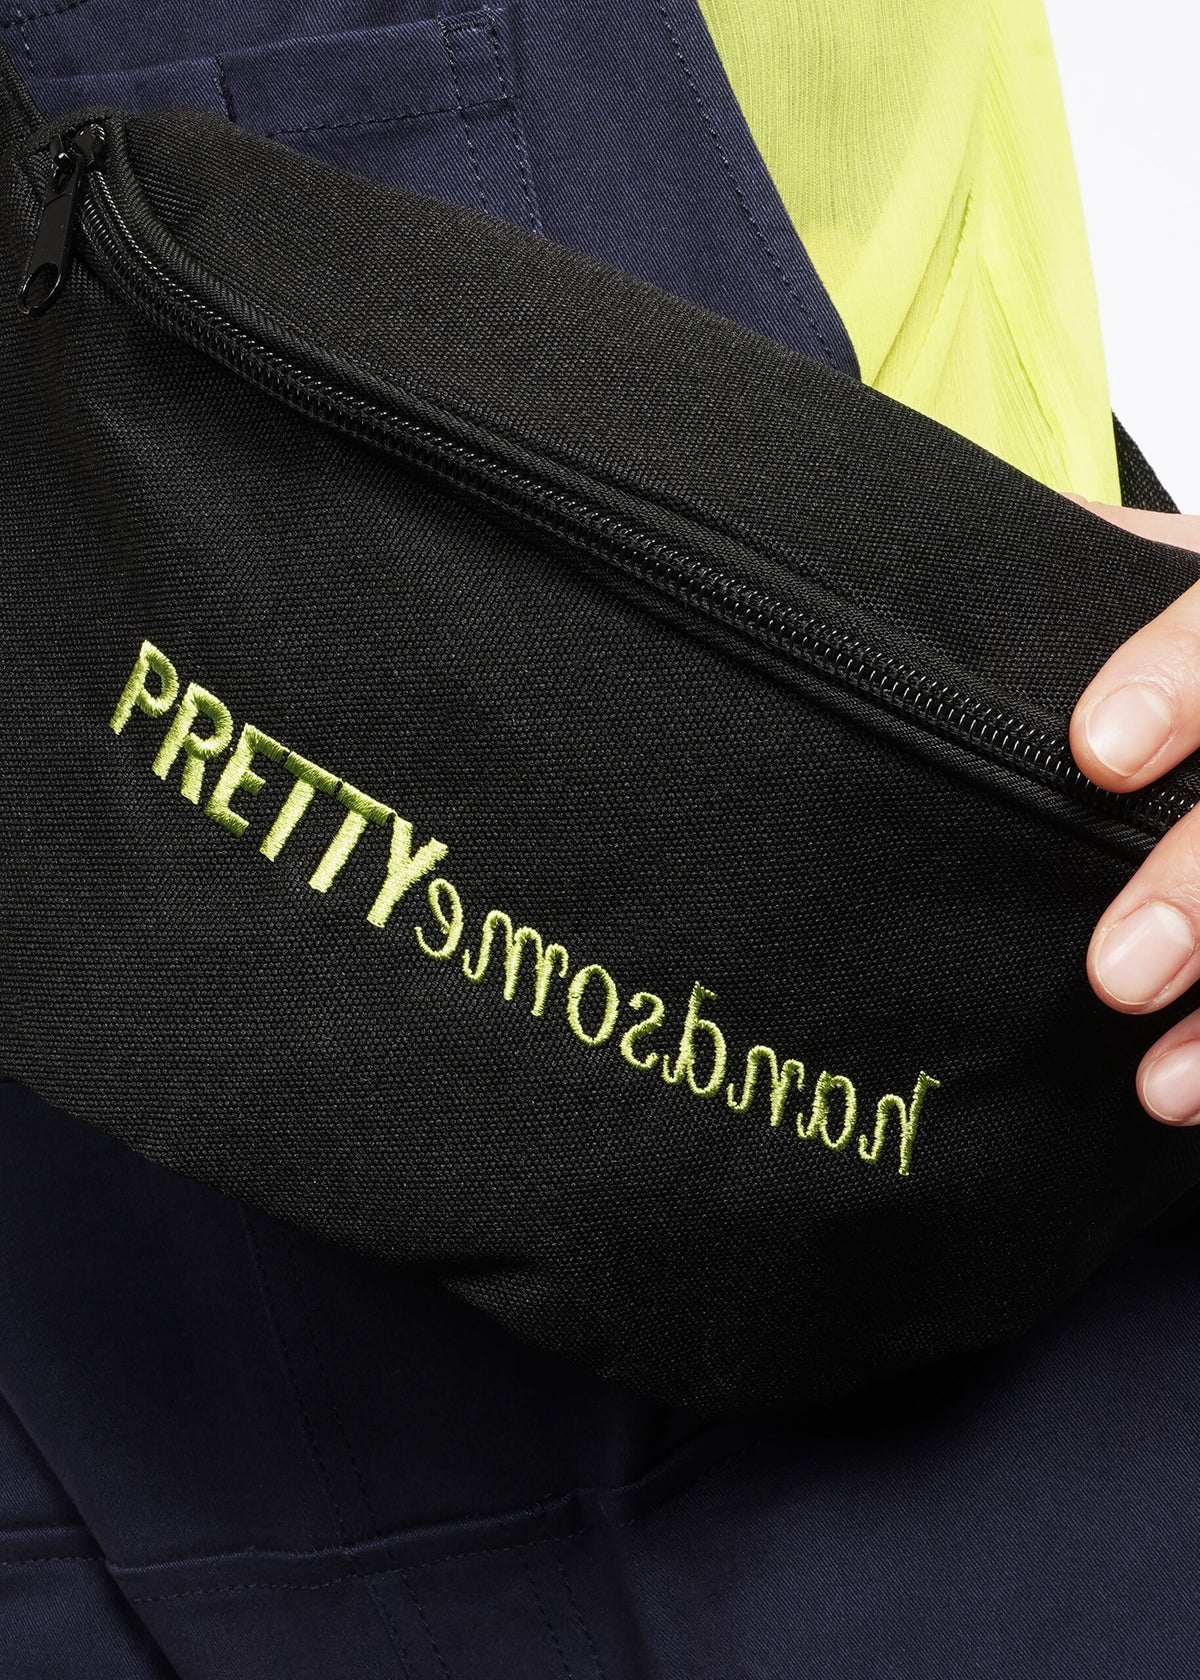 The Pretty Handsome Fanny Pack